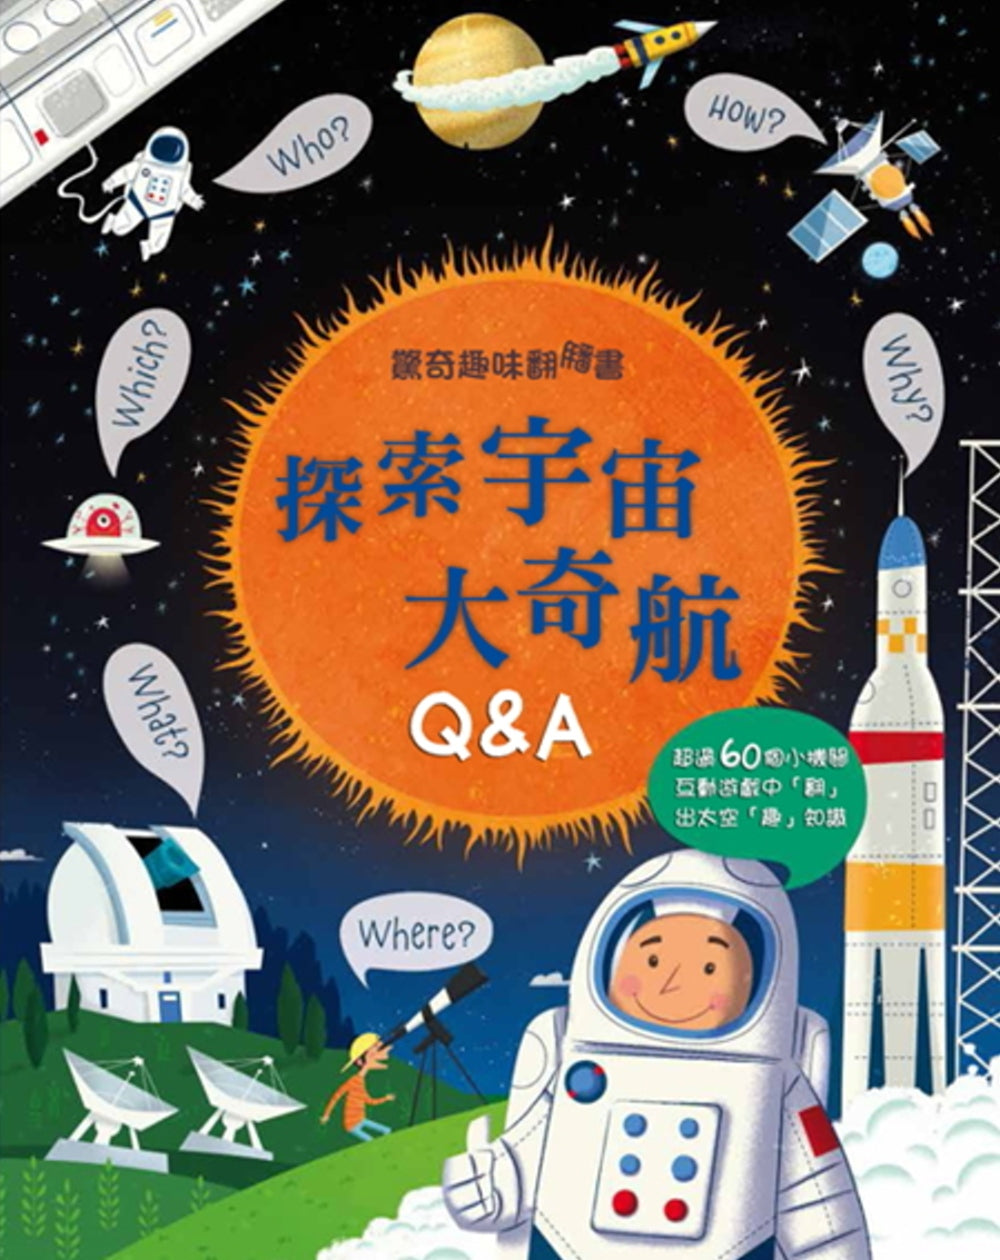 Lift-the-Flap Questions and Answers About Space • 驚奇趣味翻翻書：探索宇宙大奇航Q&A